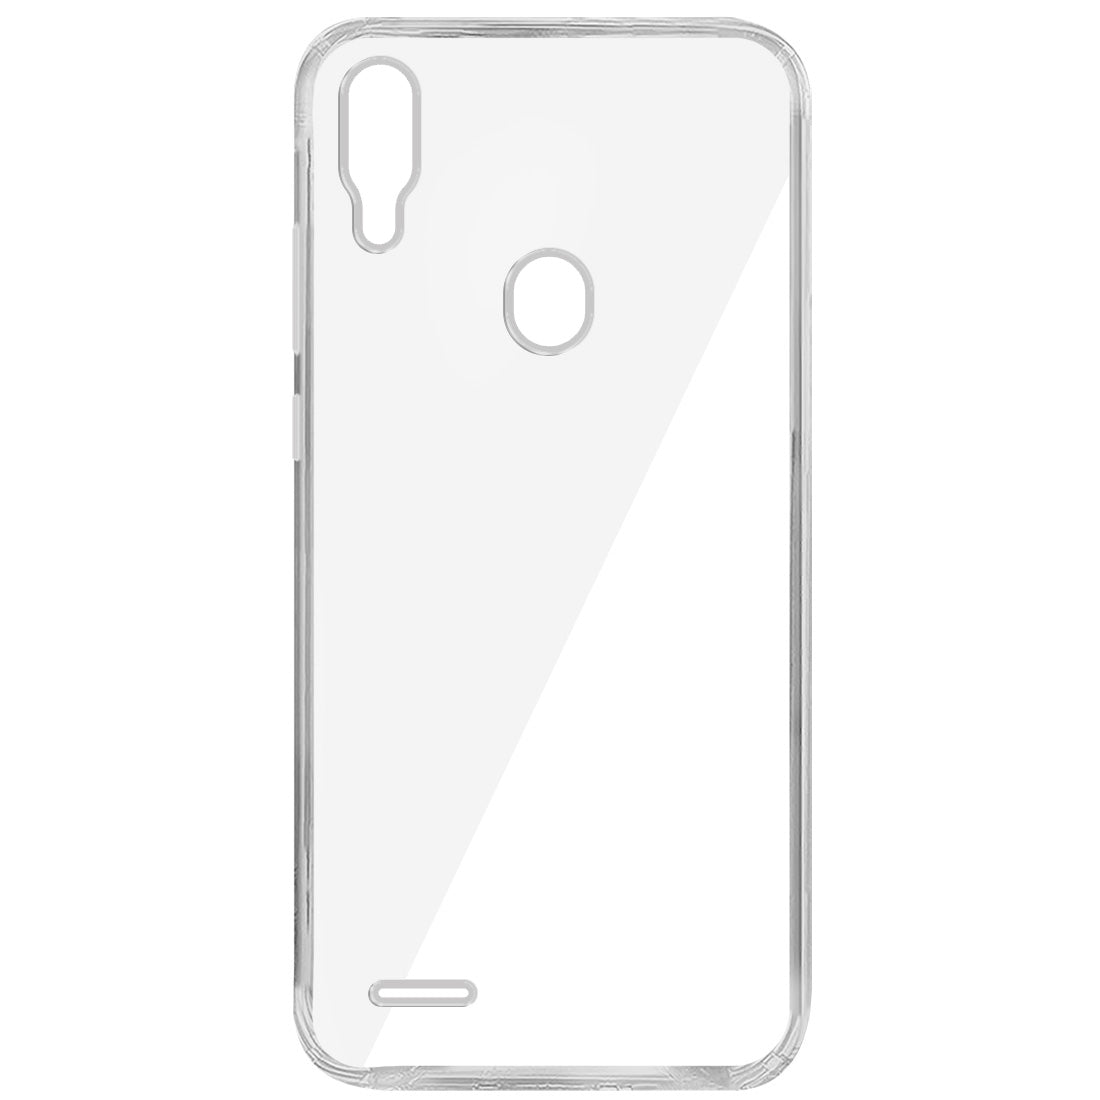 Clear Case for Lenovo A7